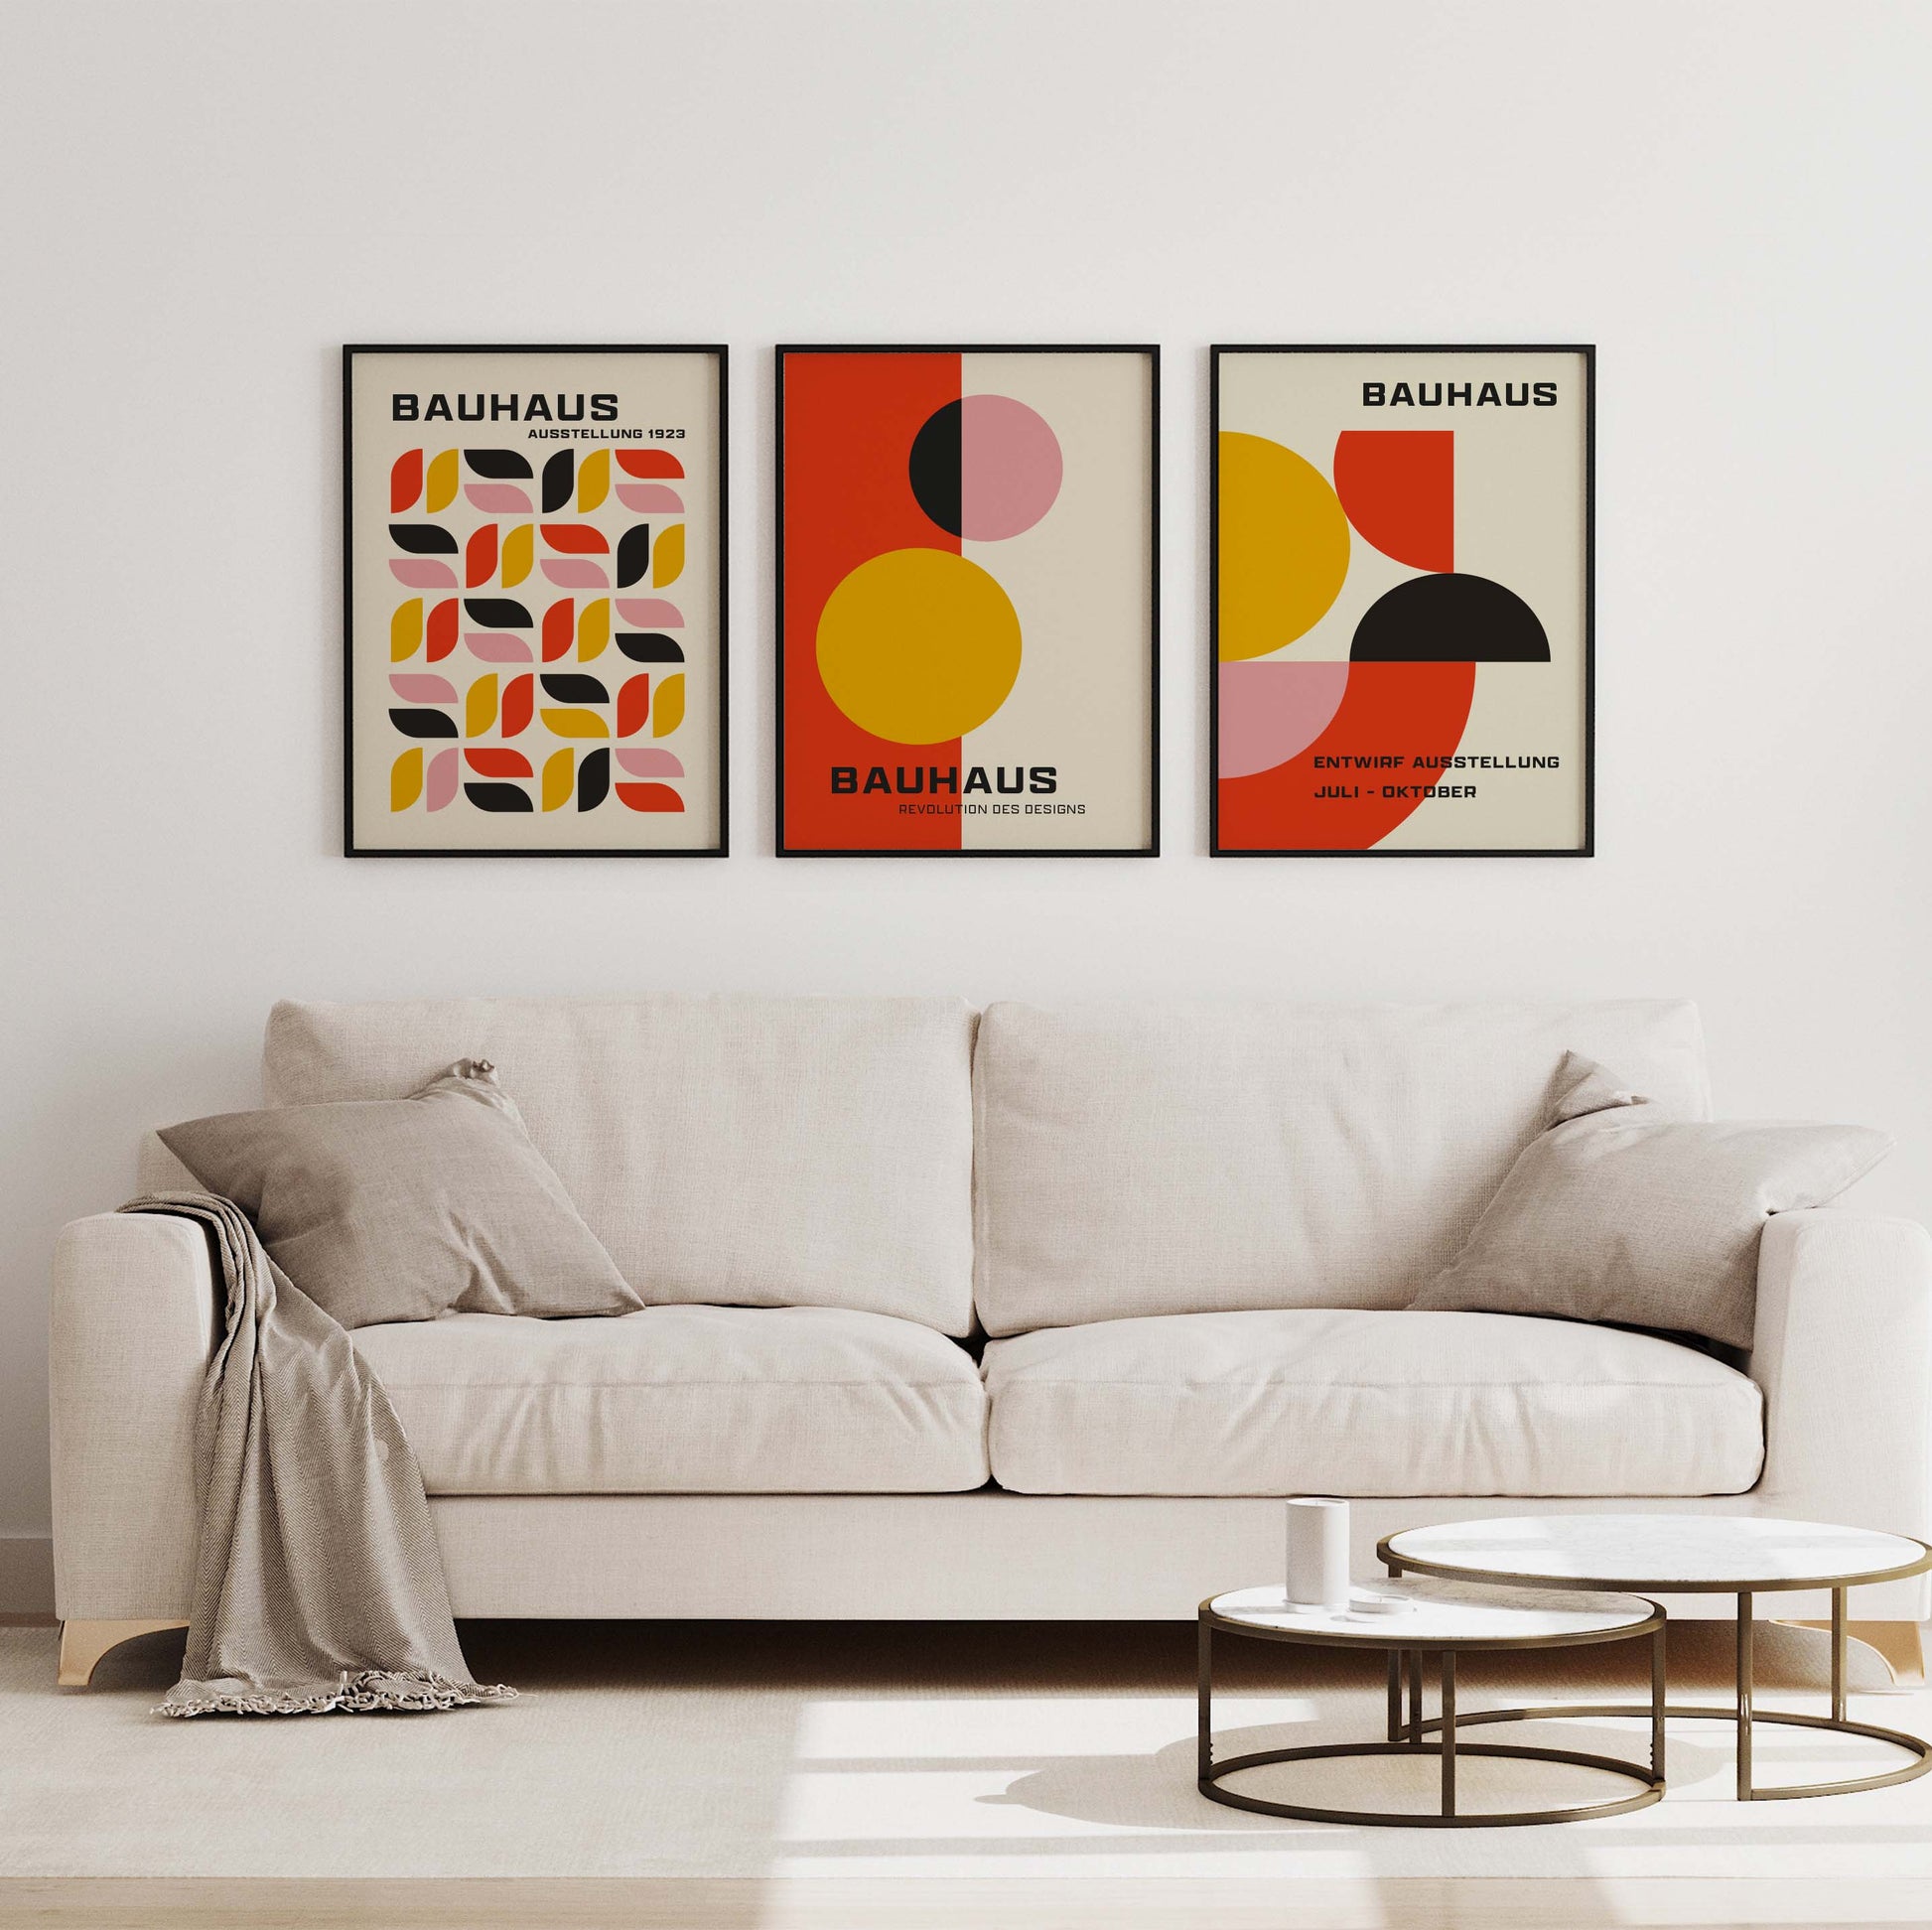 Set of Bauhaus Prints in Red, Yellow and Pink